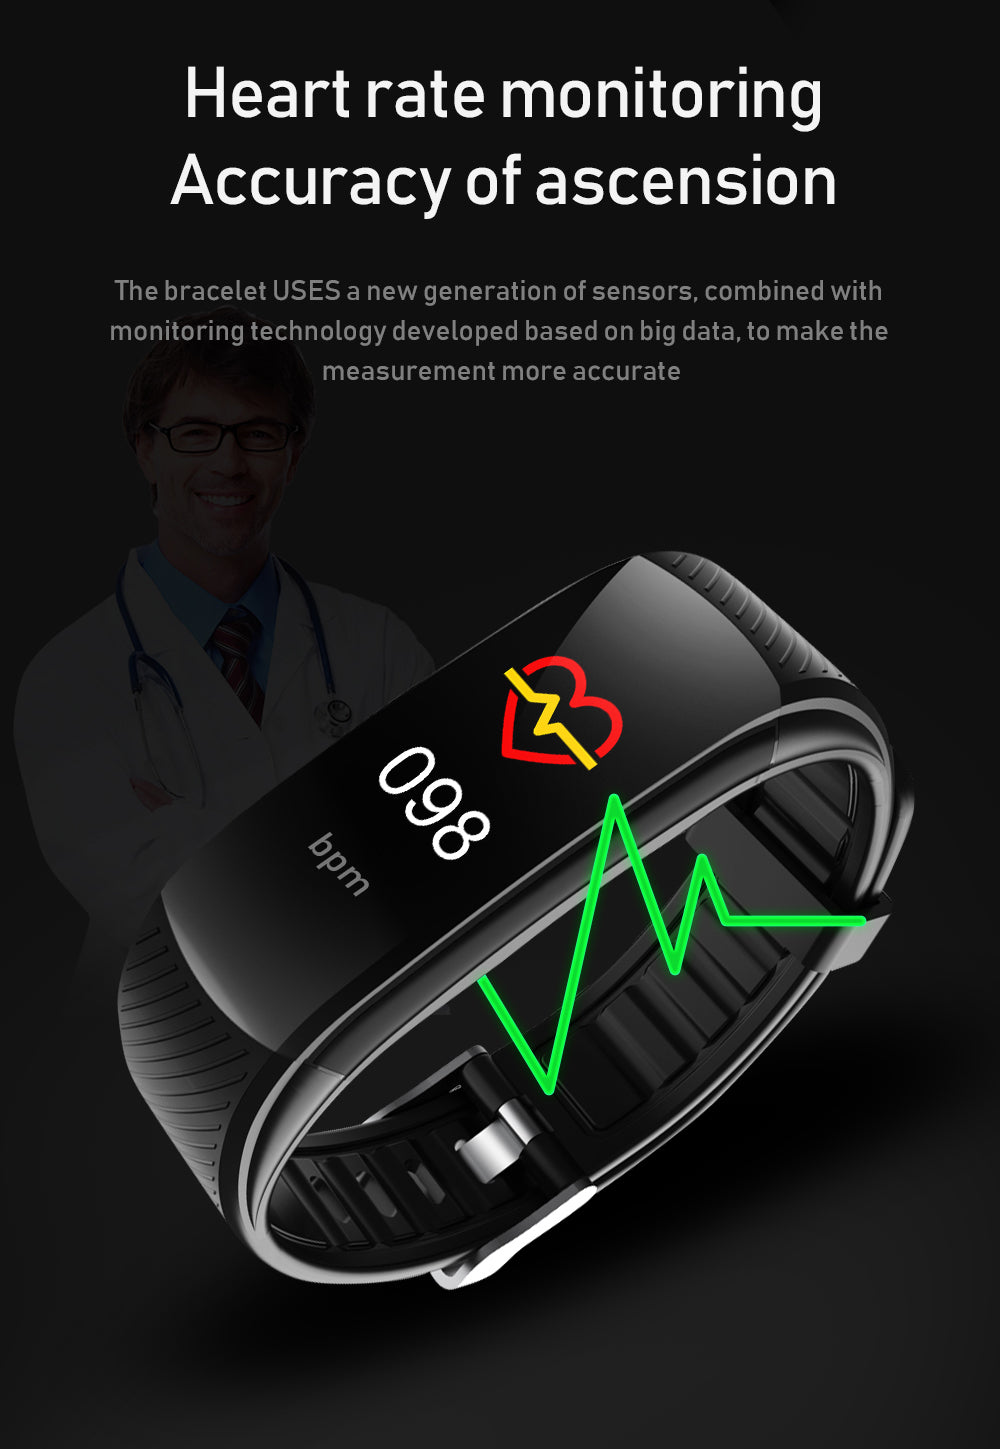 C5S Smart Bracelet Bluetooth Waterproof Blood Pressure Heart Rate for IOS Android